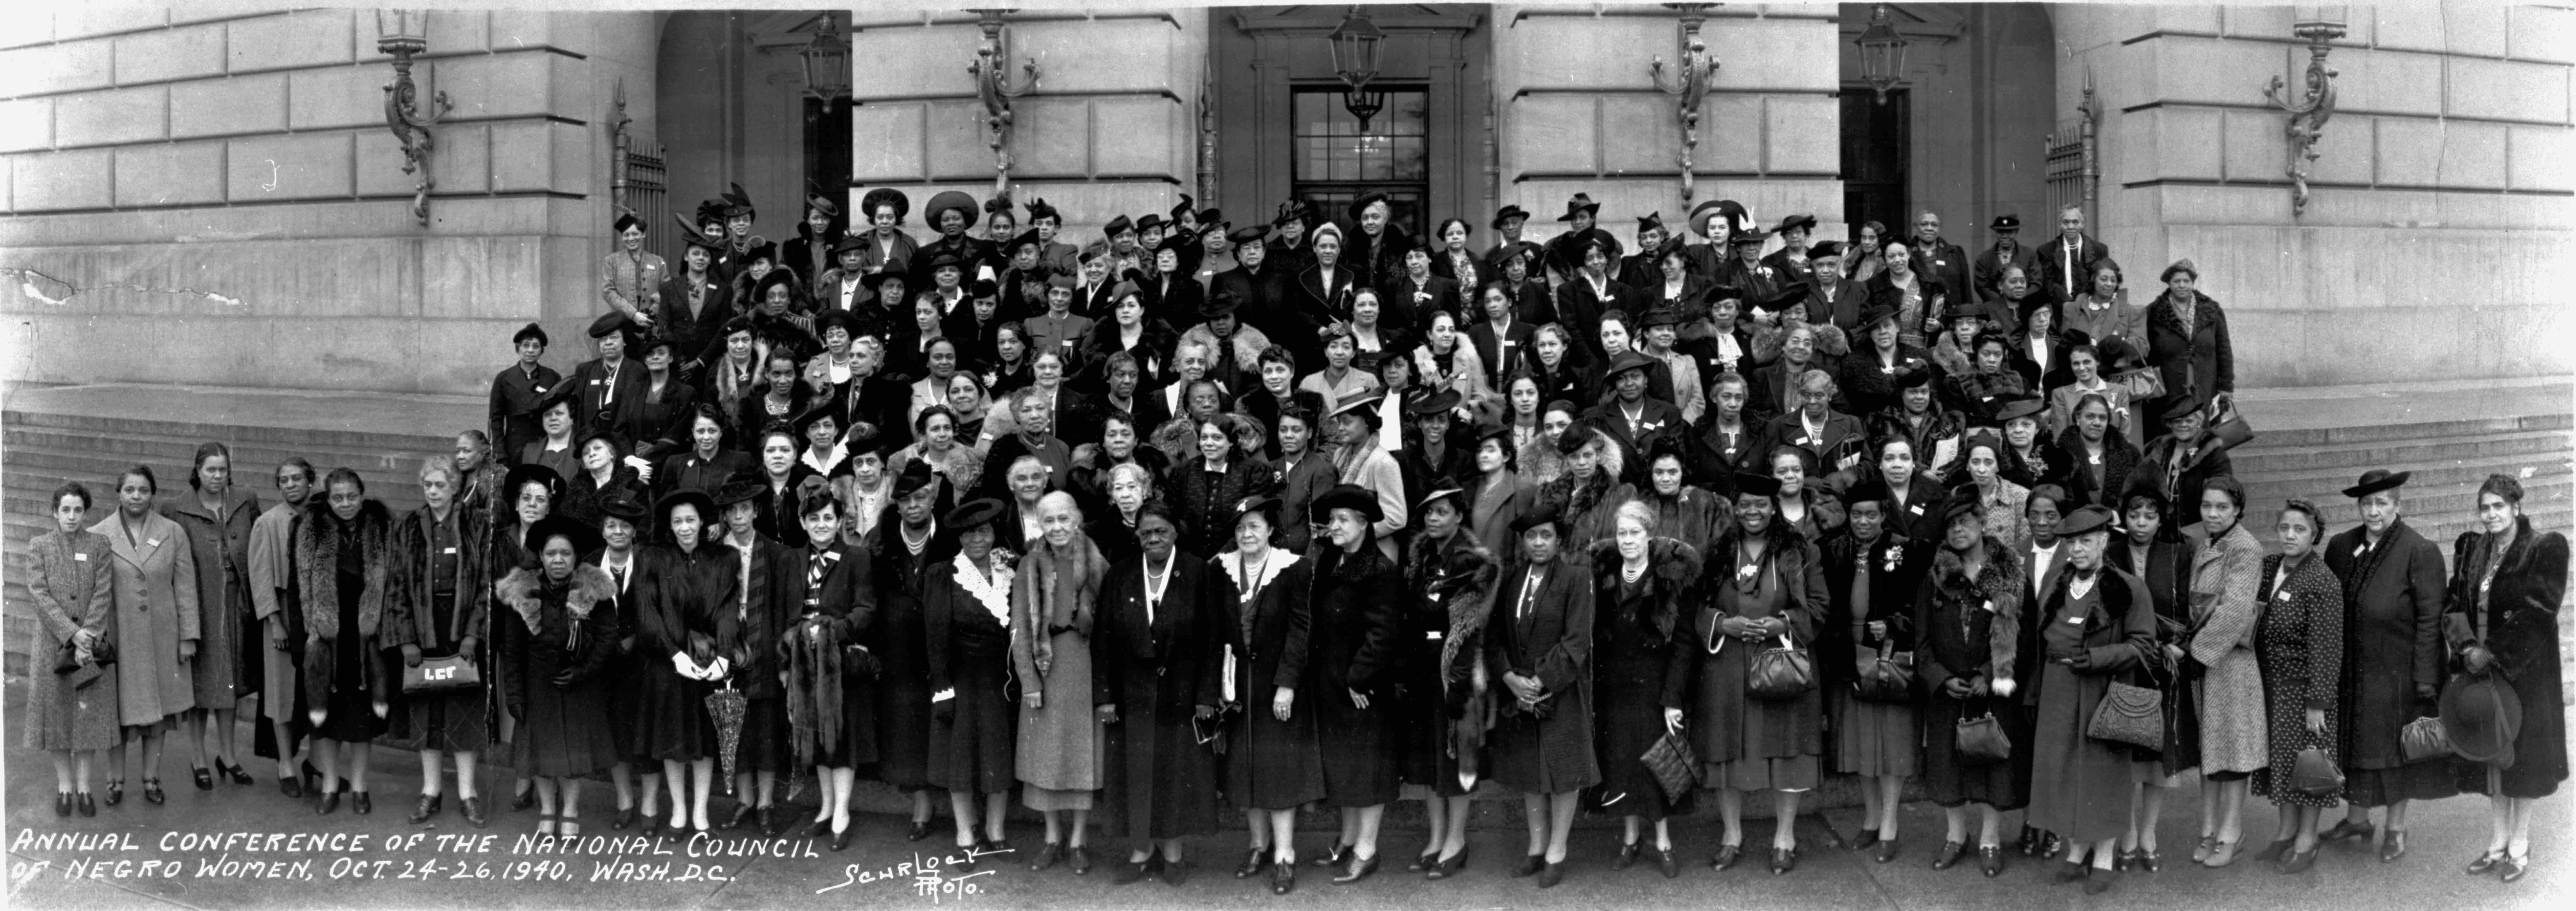 Photograph of the annual conference of the National Council of Negro Women